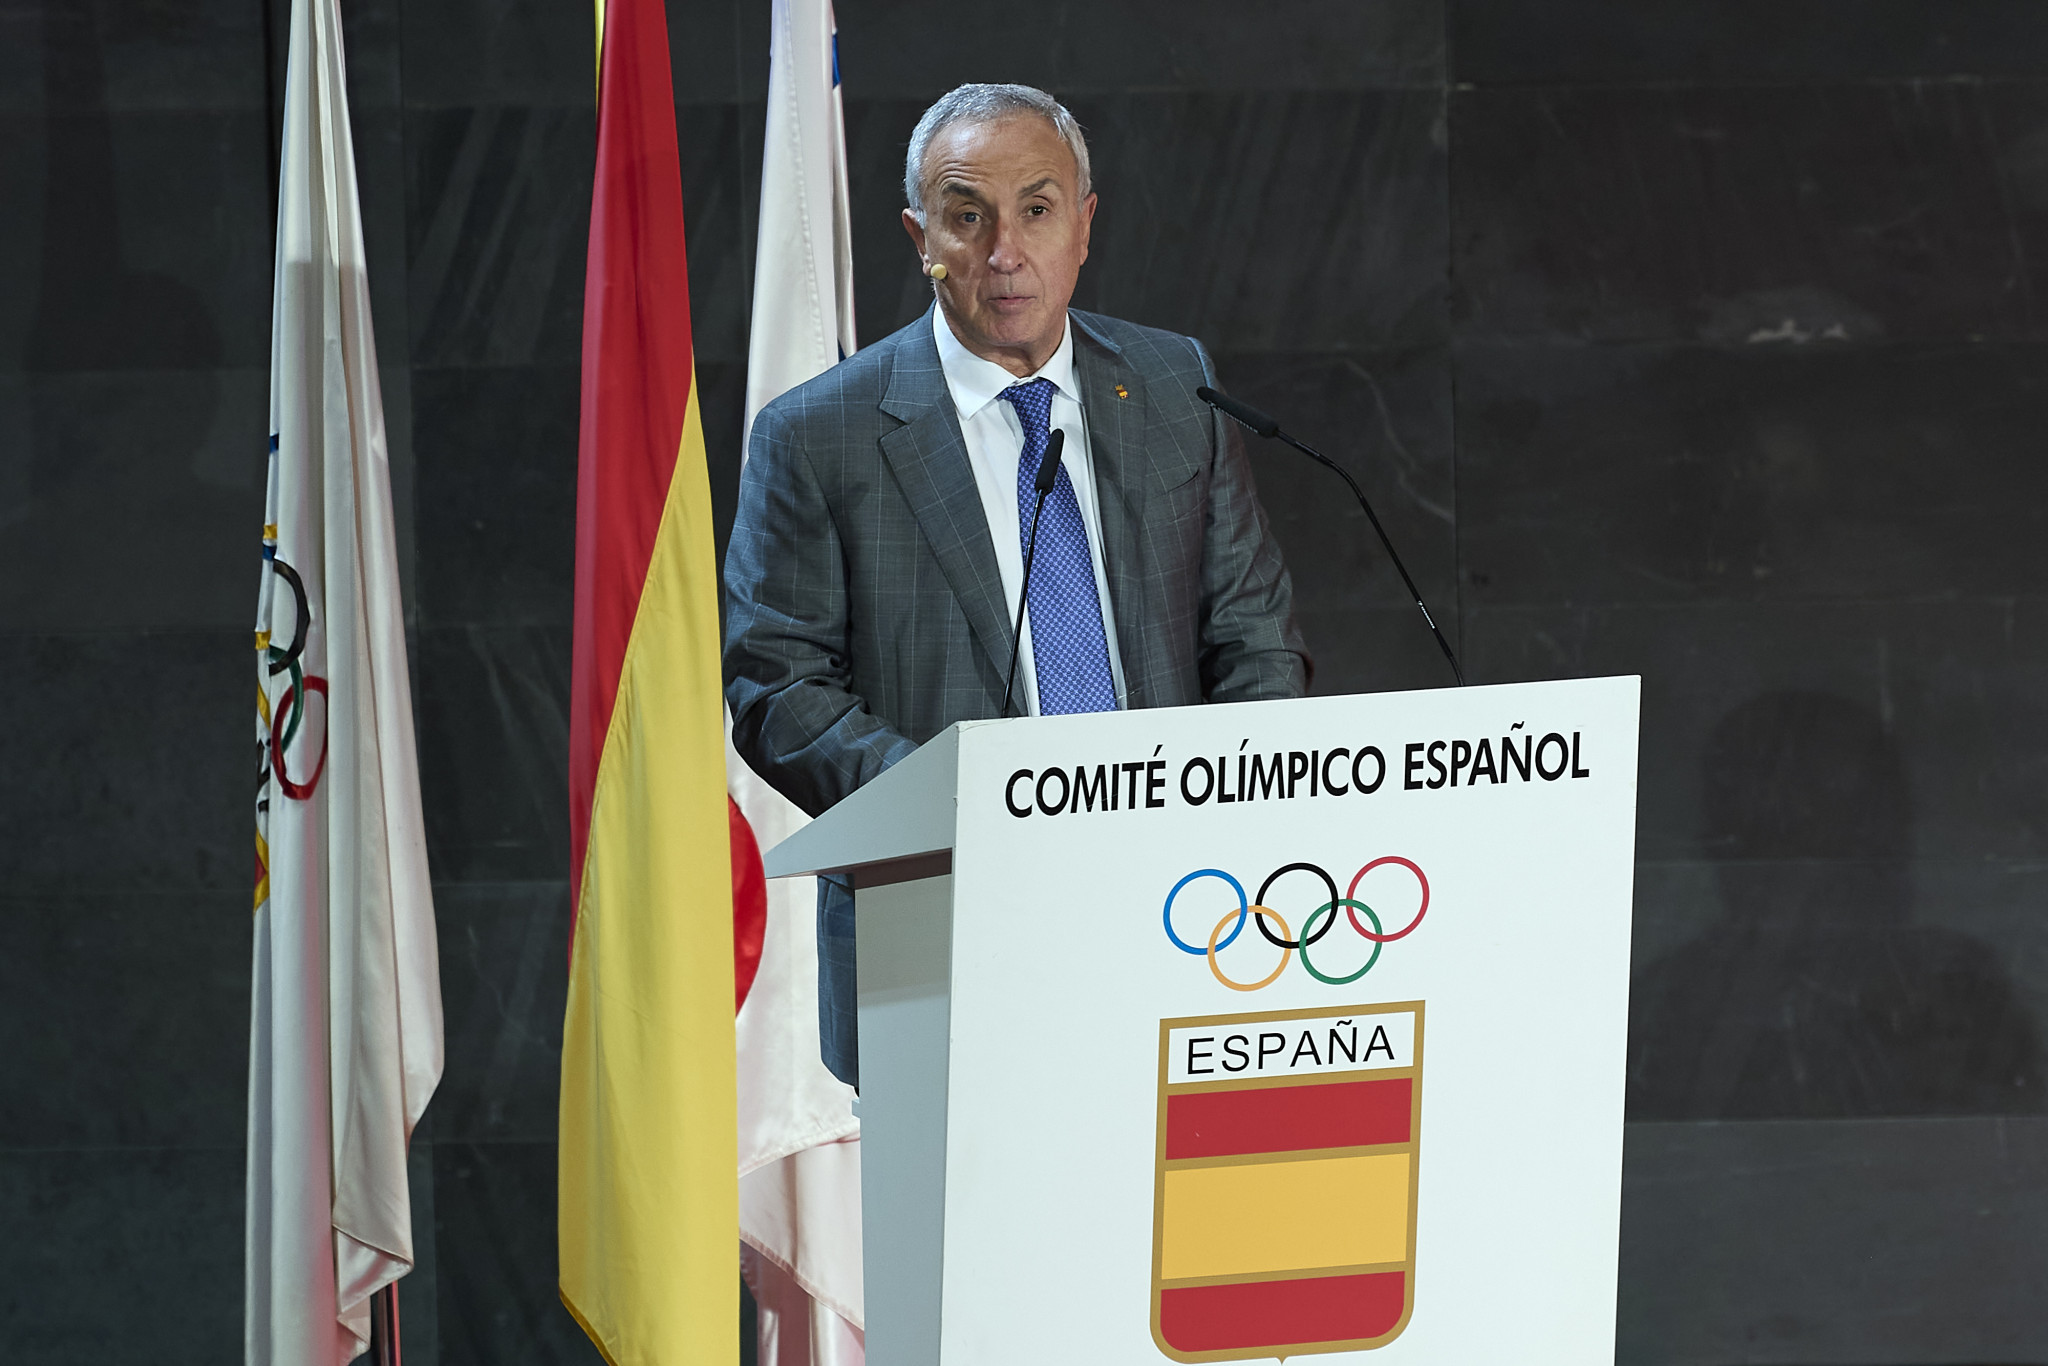 Spanish Olympic Committee President Alejandro Blanco said the main purpose of the project was to construct sports facilities in refugee centres across the country ©Getty Images